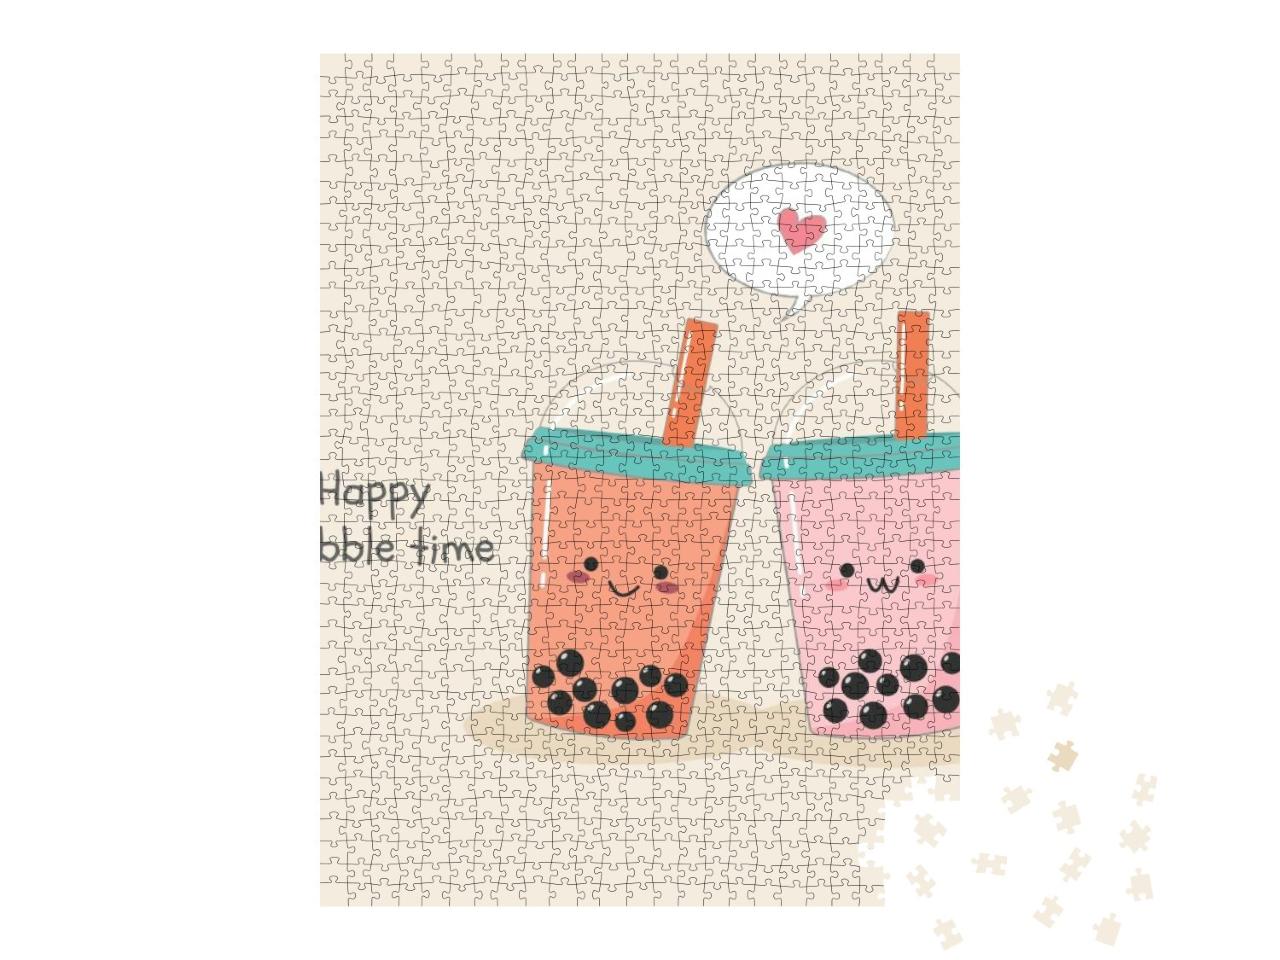 Cute Couple of Bubble Milk Ice Teas in Plastic Containers... Jigsaw Puzzle with 1000 pieces